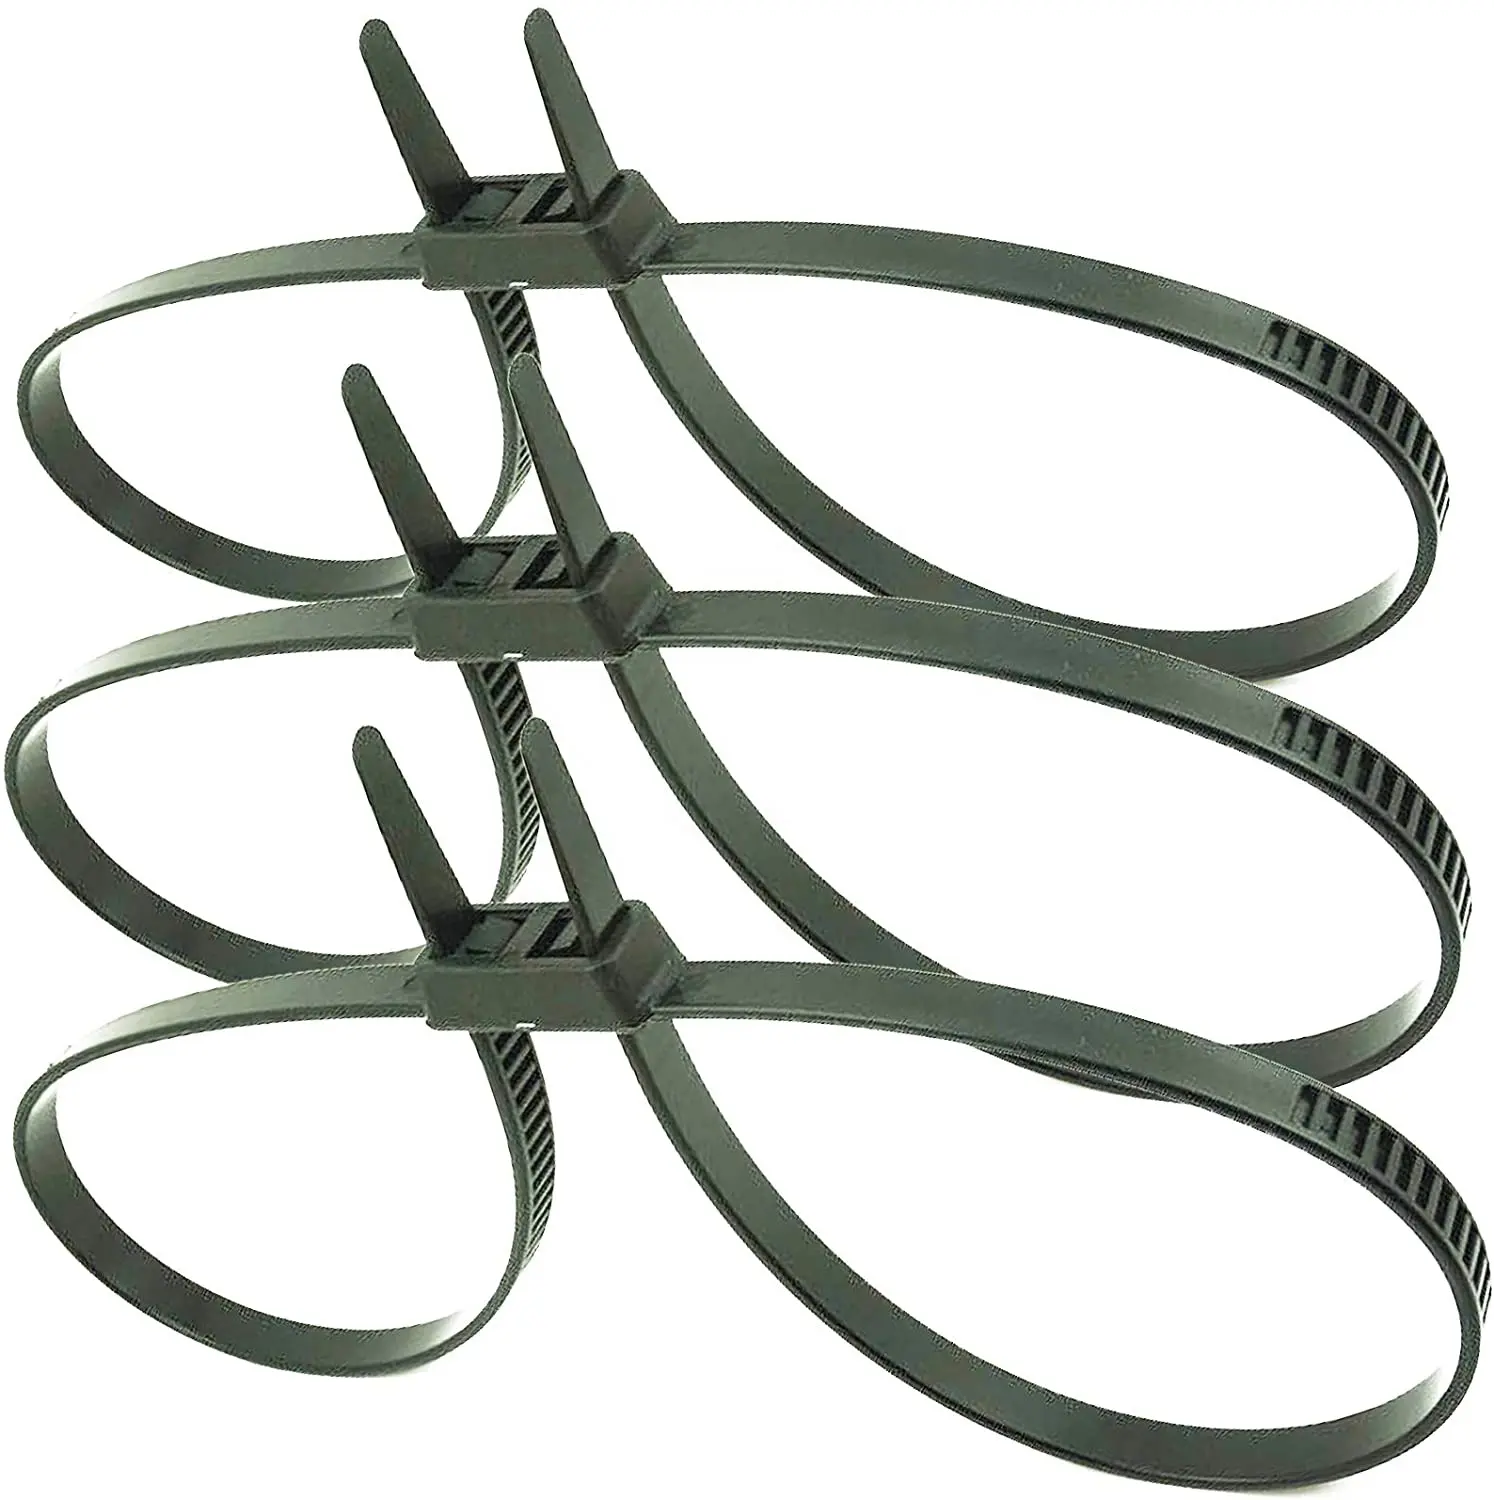 JAGASL Hot Sale Special Type Good Quality Self-Locking Plastic Nylon Double Buckle Cable Ties